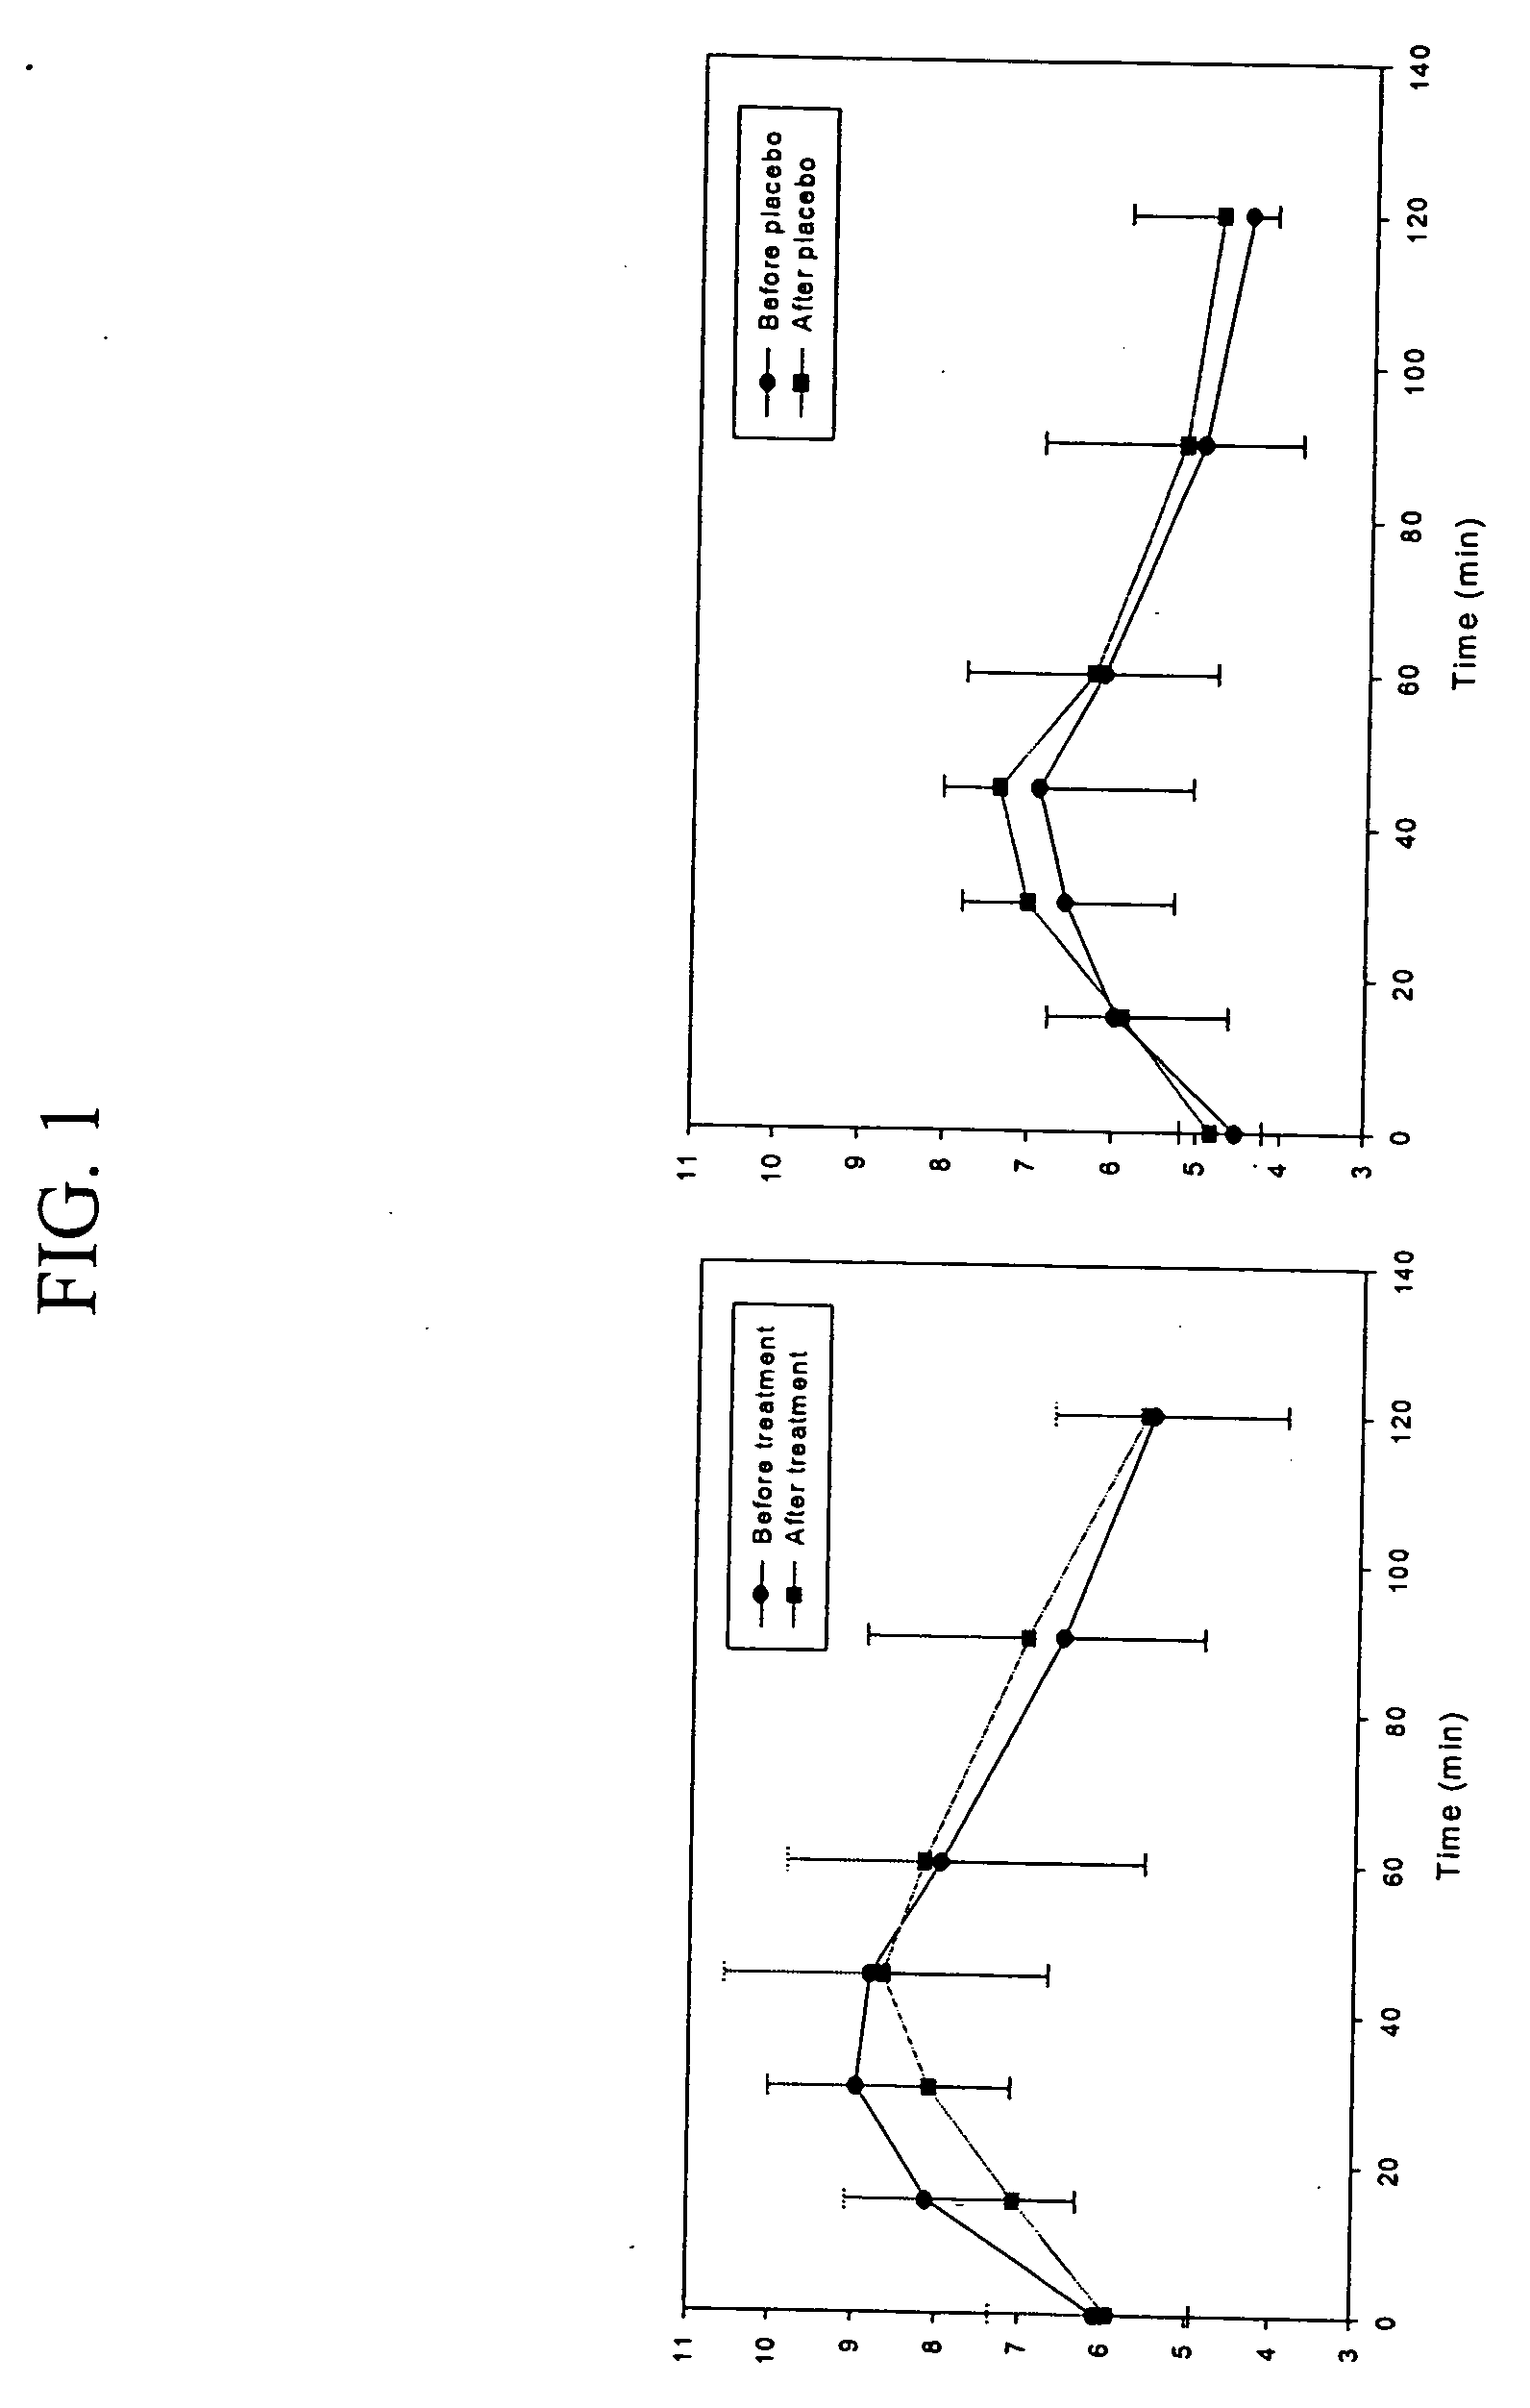 Compositions and methods for treatment and prevention of metabolic syndrome and its associated conditions with combinations of flavonoids, liminoids and tocotrienols